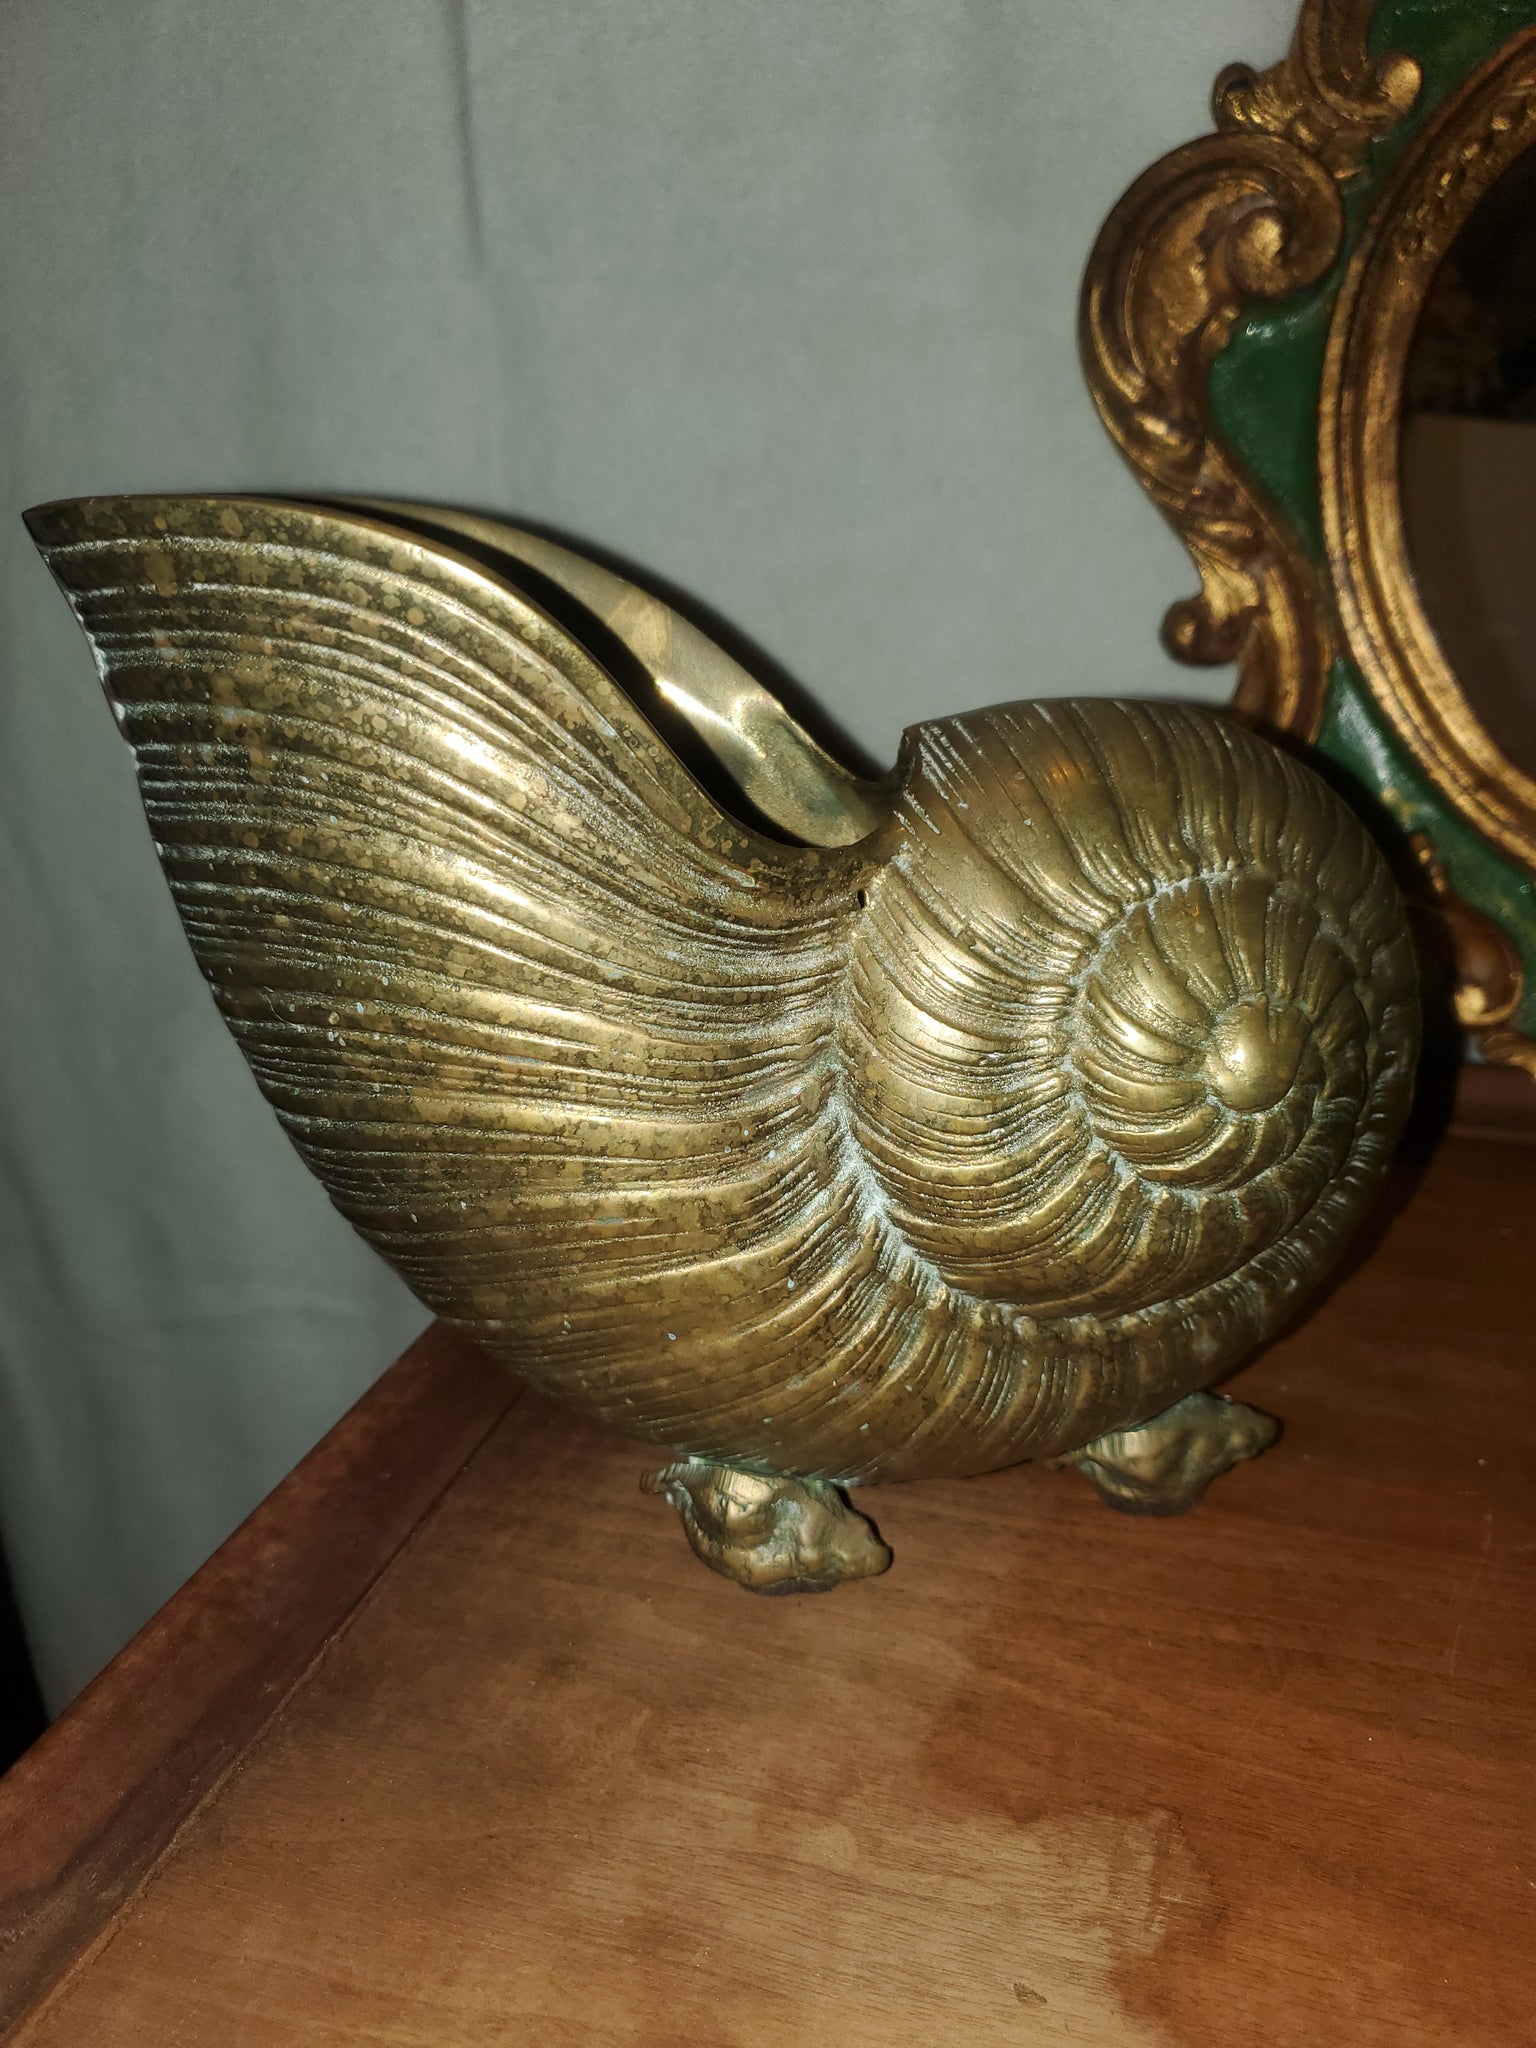 Solid Brass Nautilus Seashell Planter~ Cache Pot with Feet